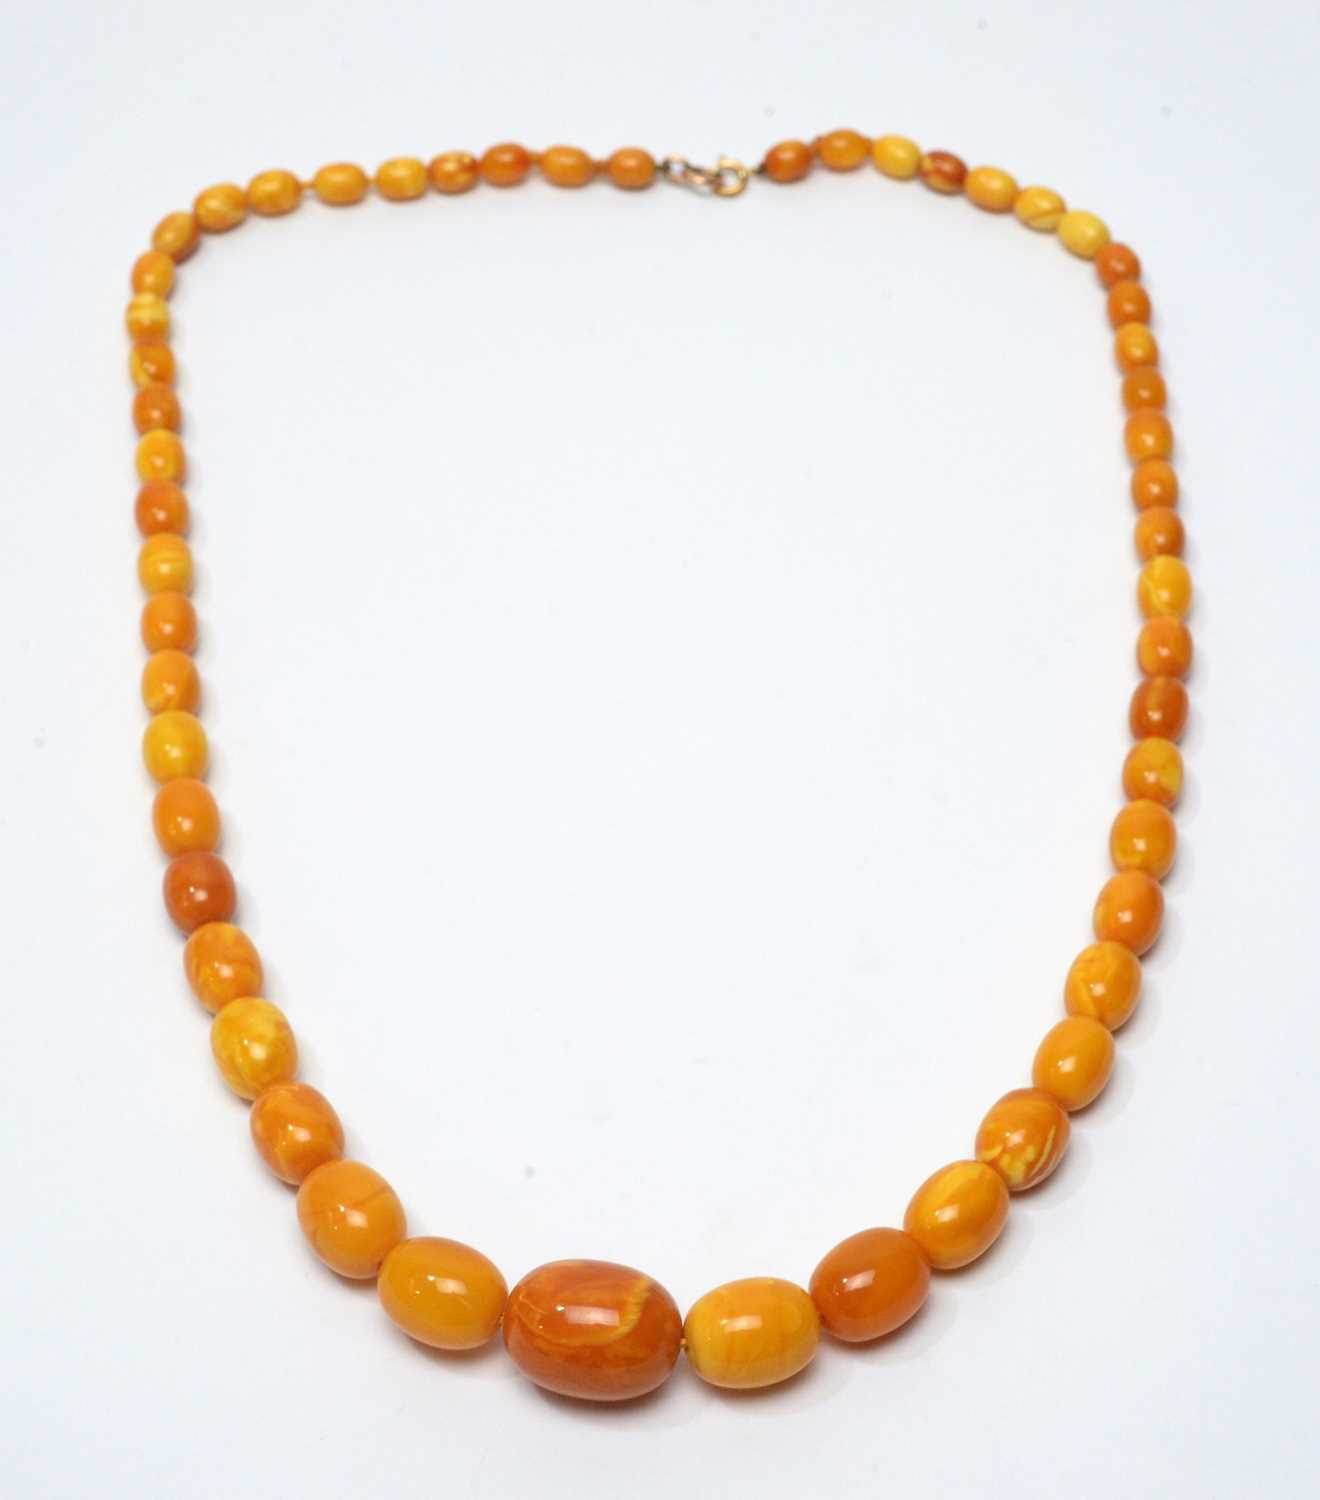 41 g Antique Baltic Amber necklace old honey butterscotch egg yolk colour,  vintage - Catawiki